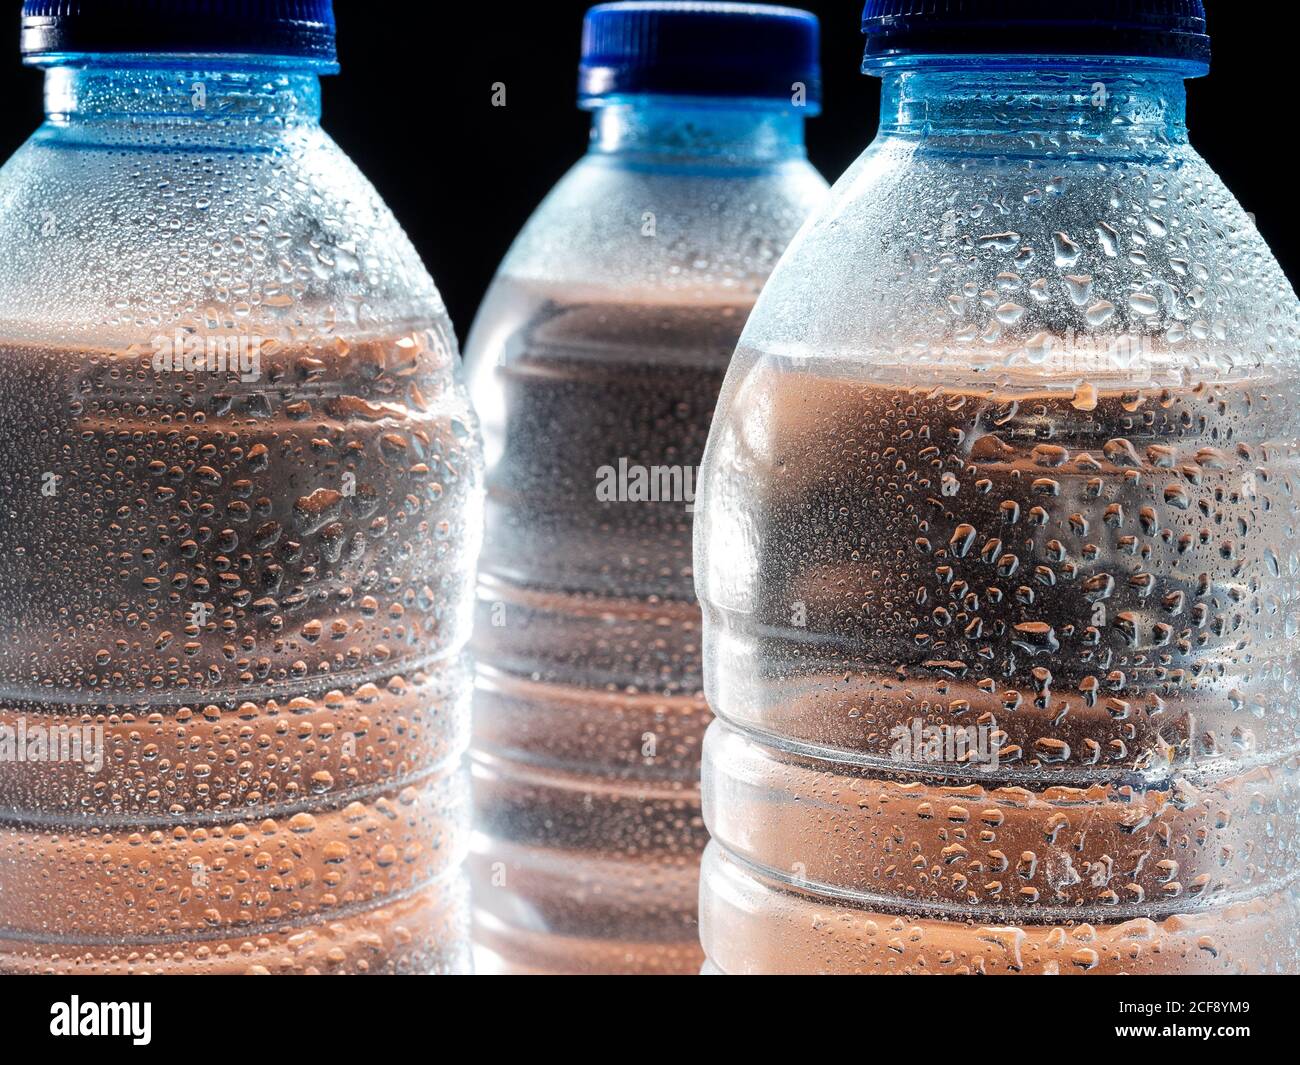 https://c8.alamy.com/comp/2CF8YM9/group-of-very-cold-water-bottles-with-blue-caps-and-water-drops-2CF8YM9.jpg